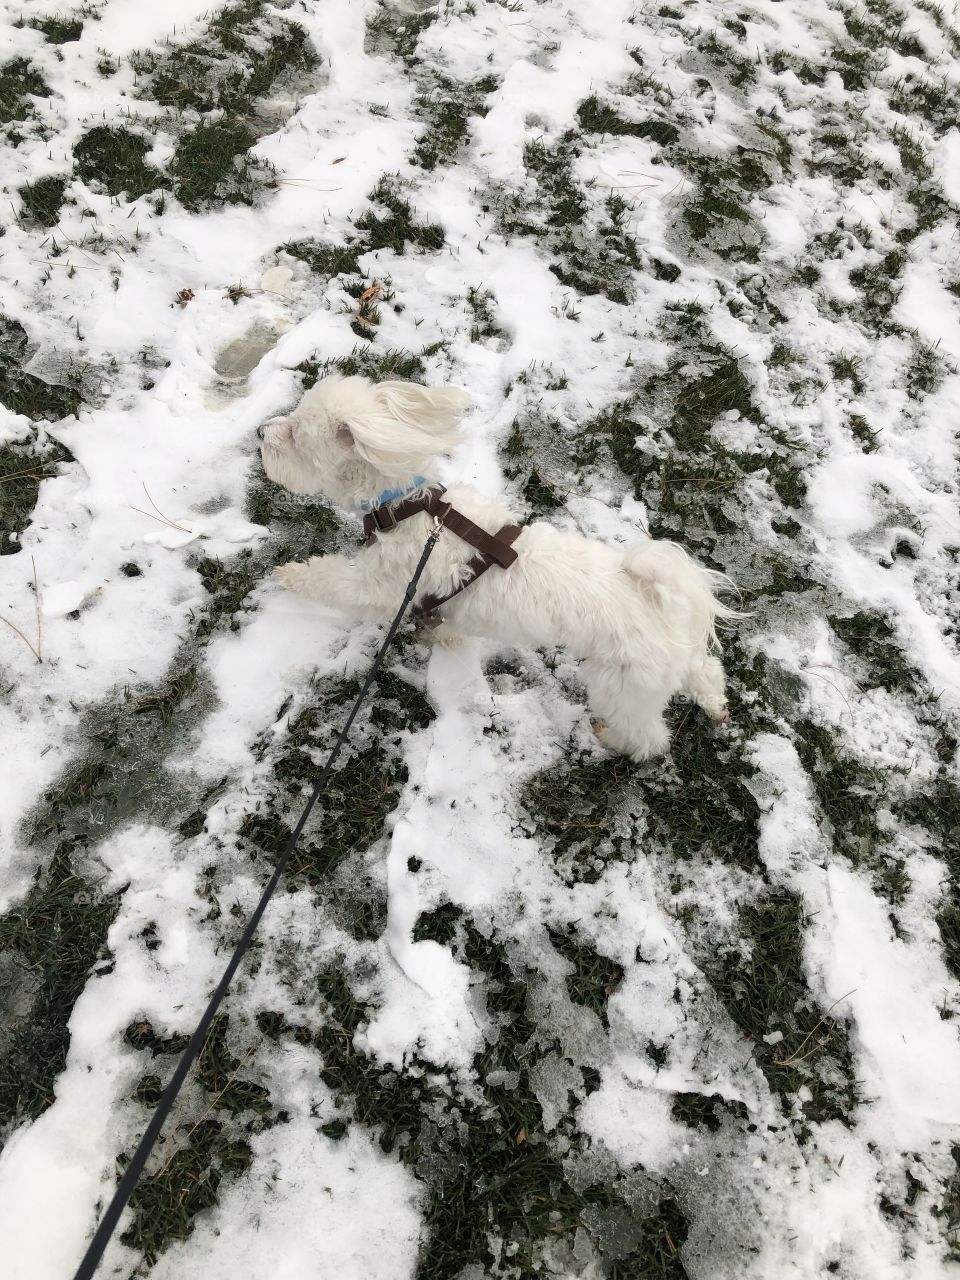 Walking around the park with my best friend in a snowy day